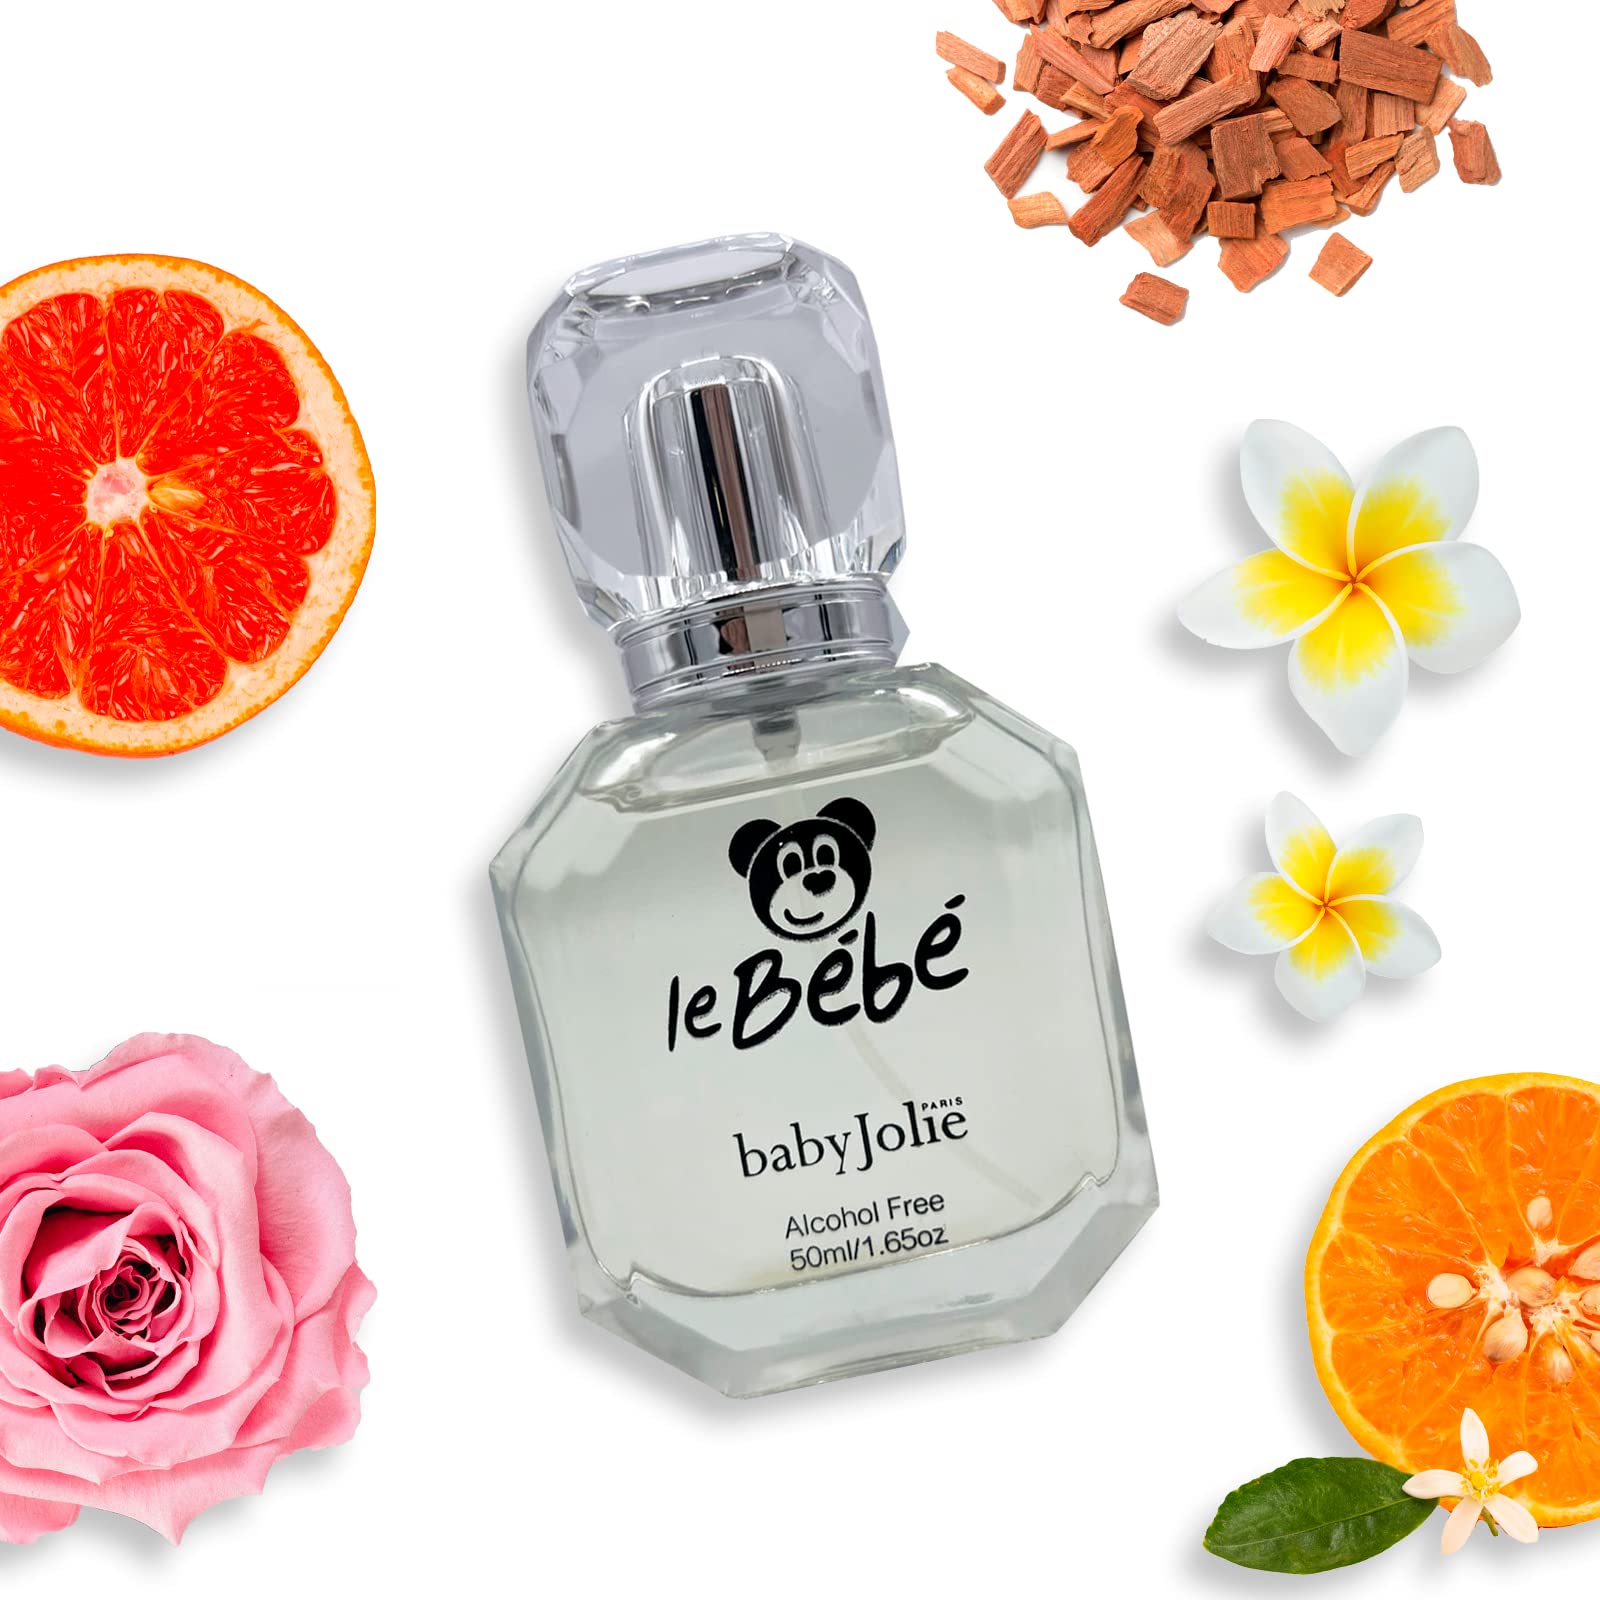 Baby Jolie Le Bebe Kids Perfume with Flower and Fruits Scent – Baby Perfume with Delicate Fragrance – Alcohol Free Baby Cologne Spray for Kids and Toddlers